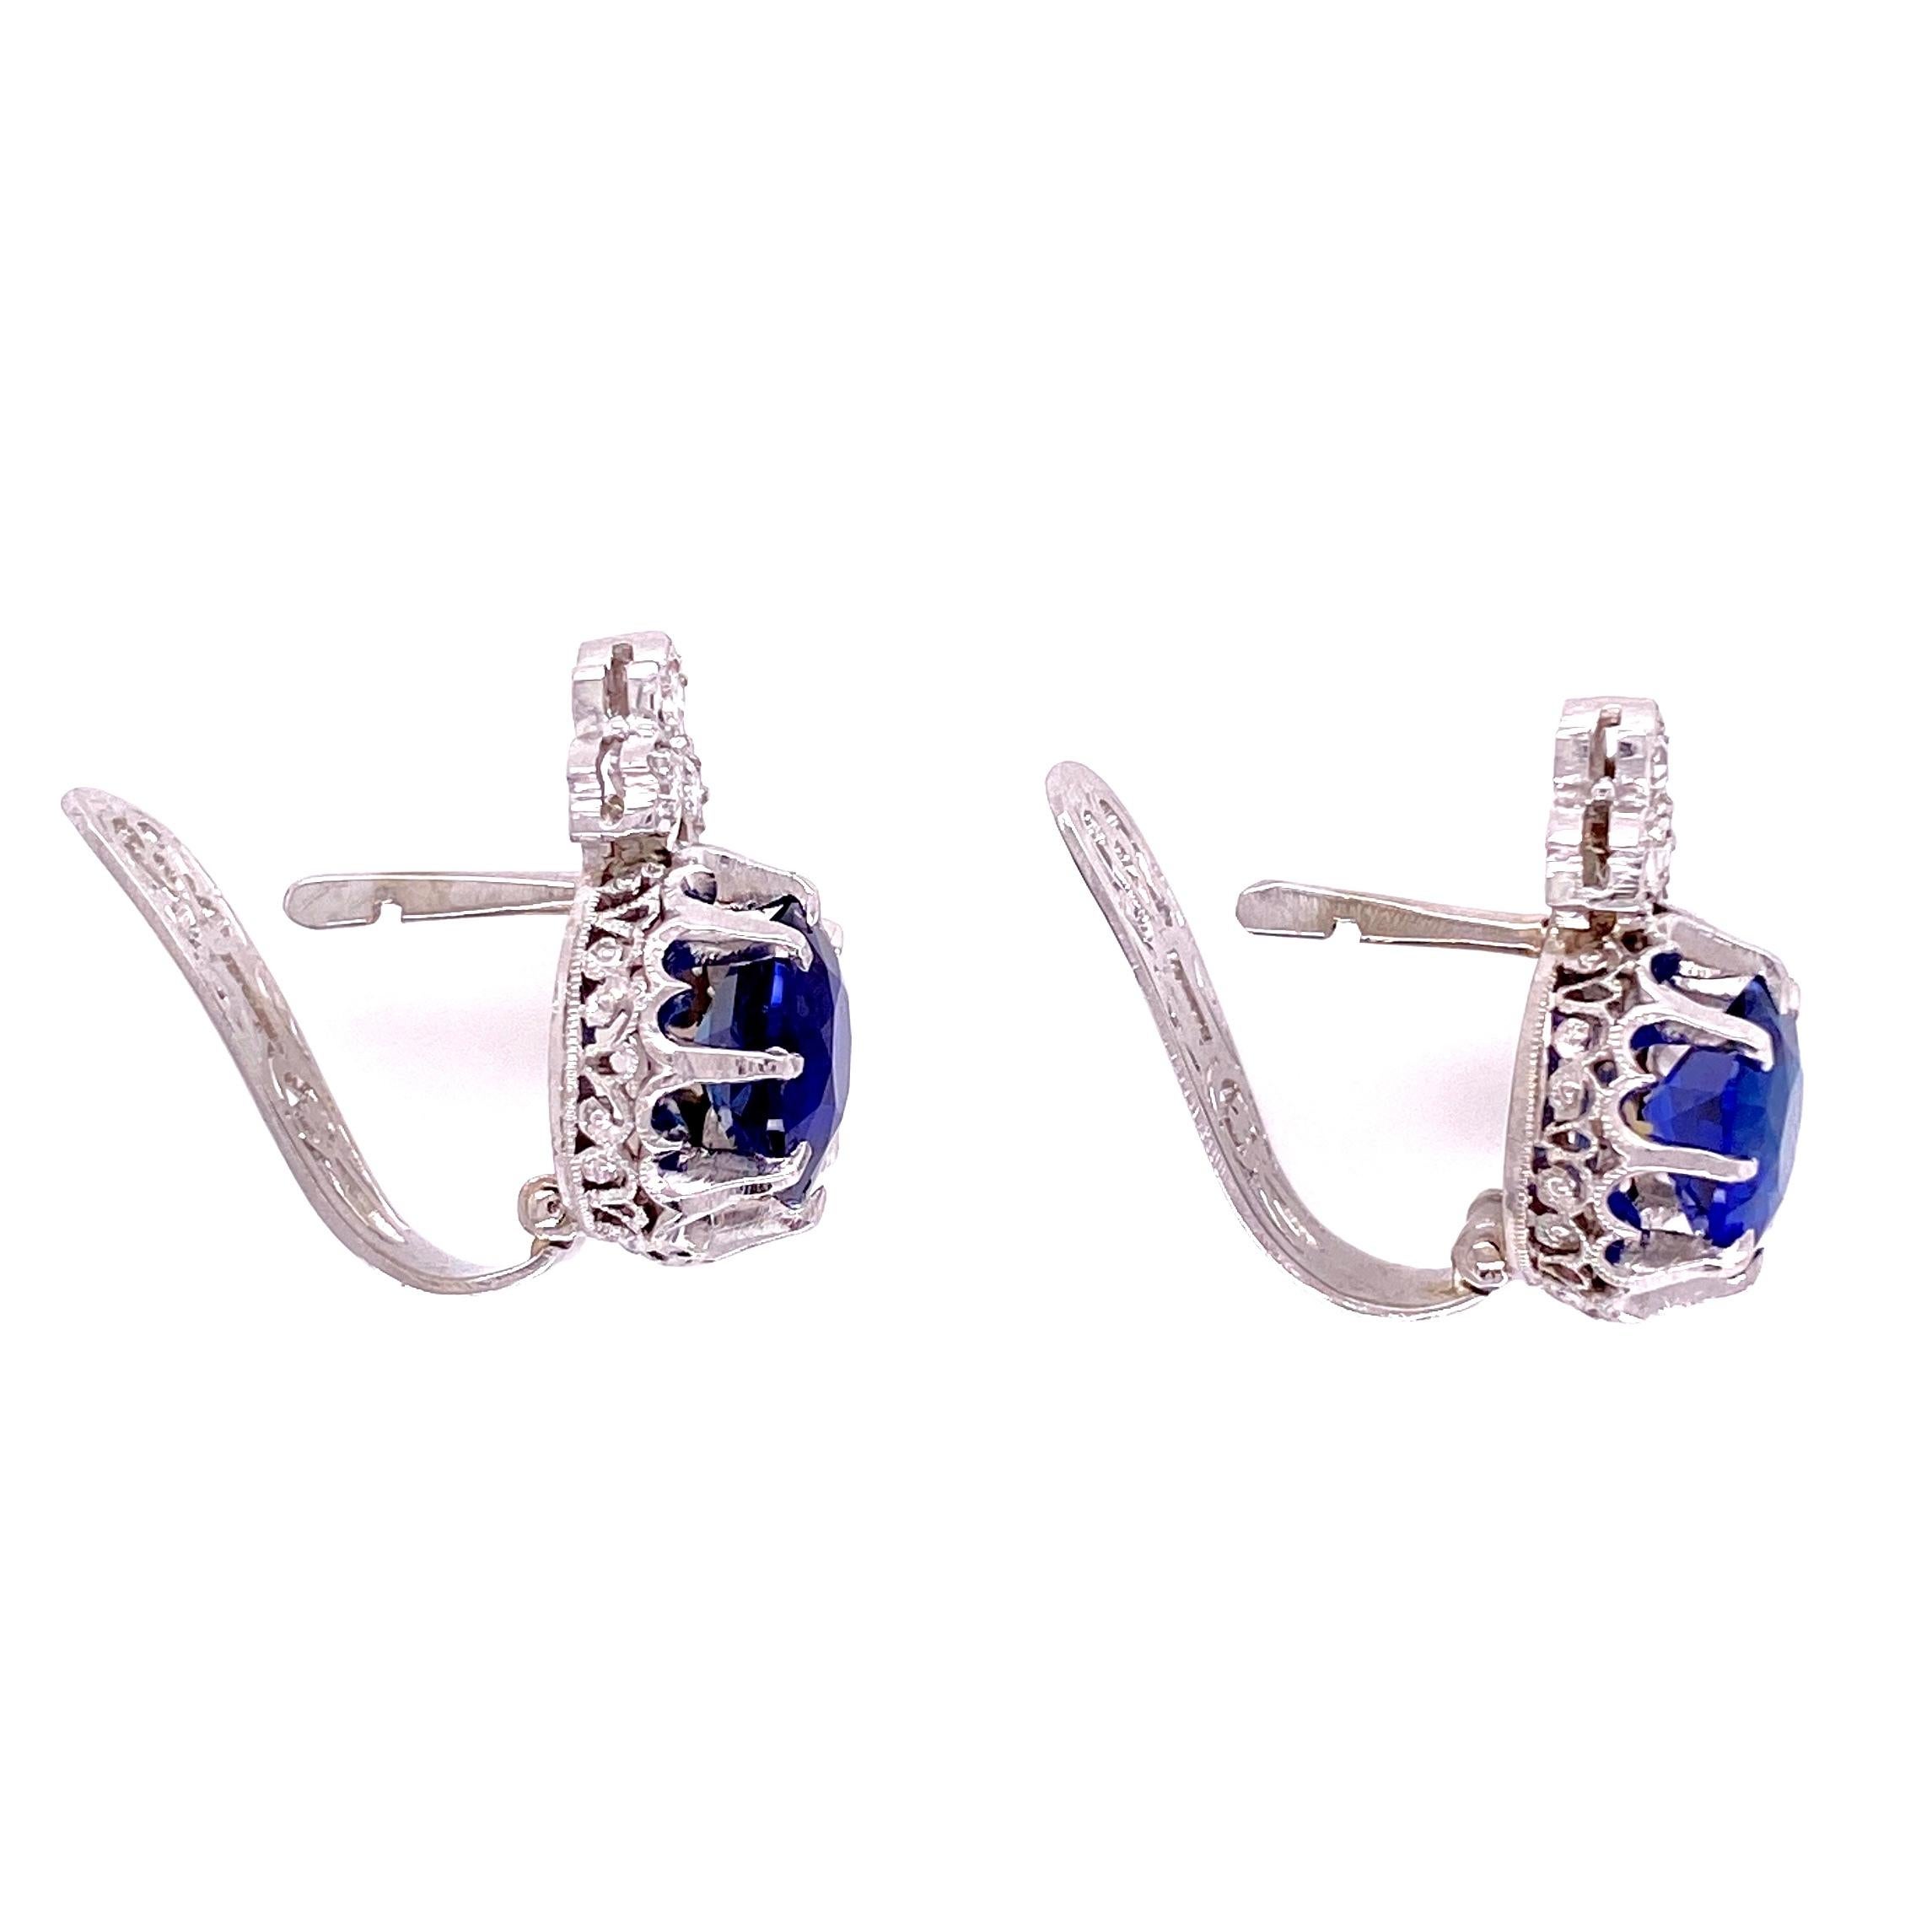 Simply Beautiful! Finely detailed Art Deco Revival Sapphire and Diamond Drop Earrings. Each center securely set with a Blue Sapphire; approx. total weight of the 2 Sapphires 3.64tcw, surrounded by Diamonds, approx. 0.20tcw. Hand crafted Platinum